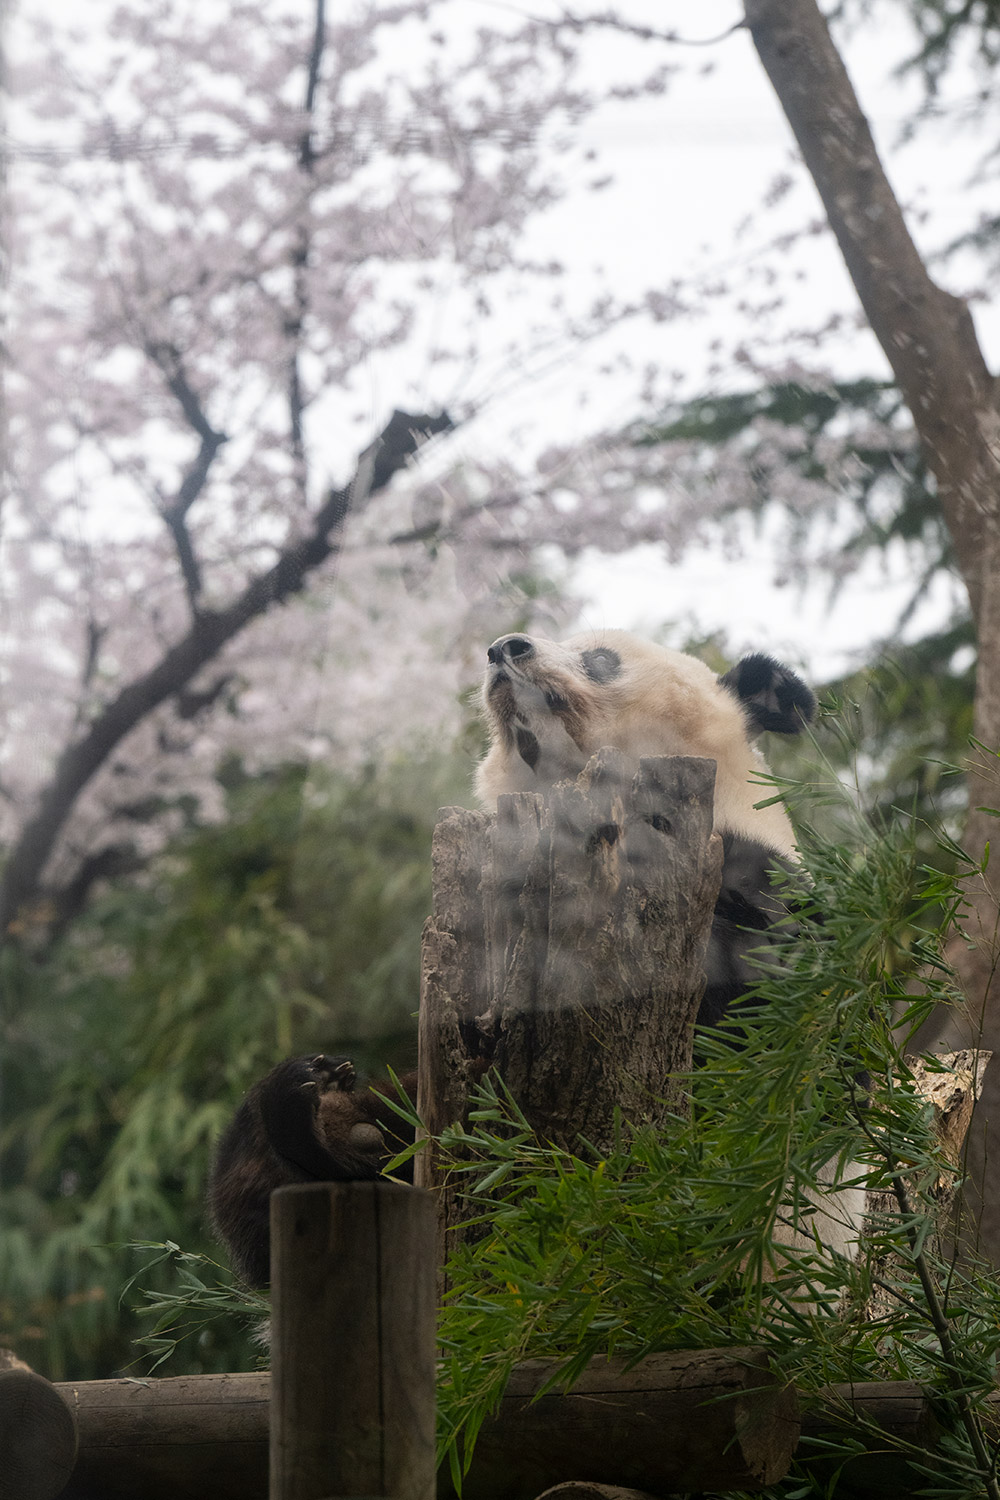 Xiang Xiang under the cherry blossom trees in the courtyard, taken on March 29, 2022. Gao's Guibo Picture